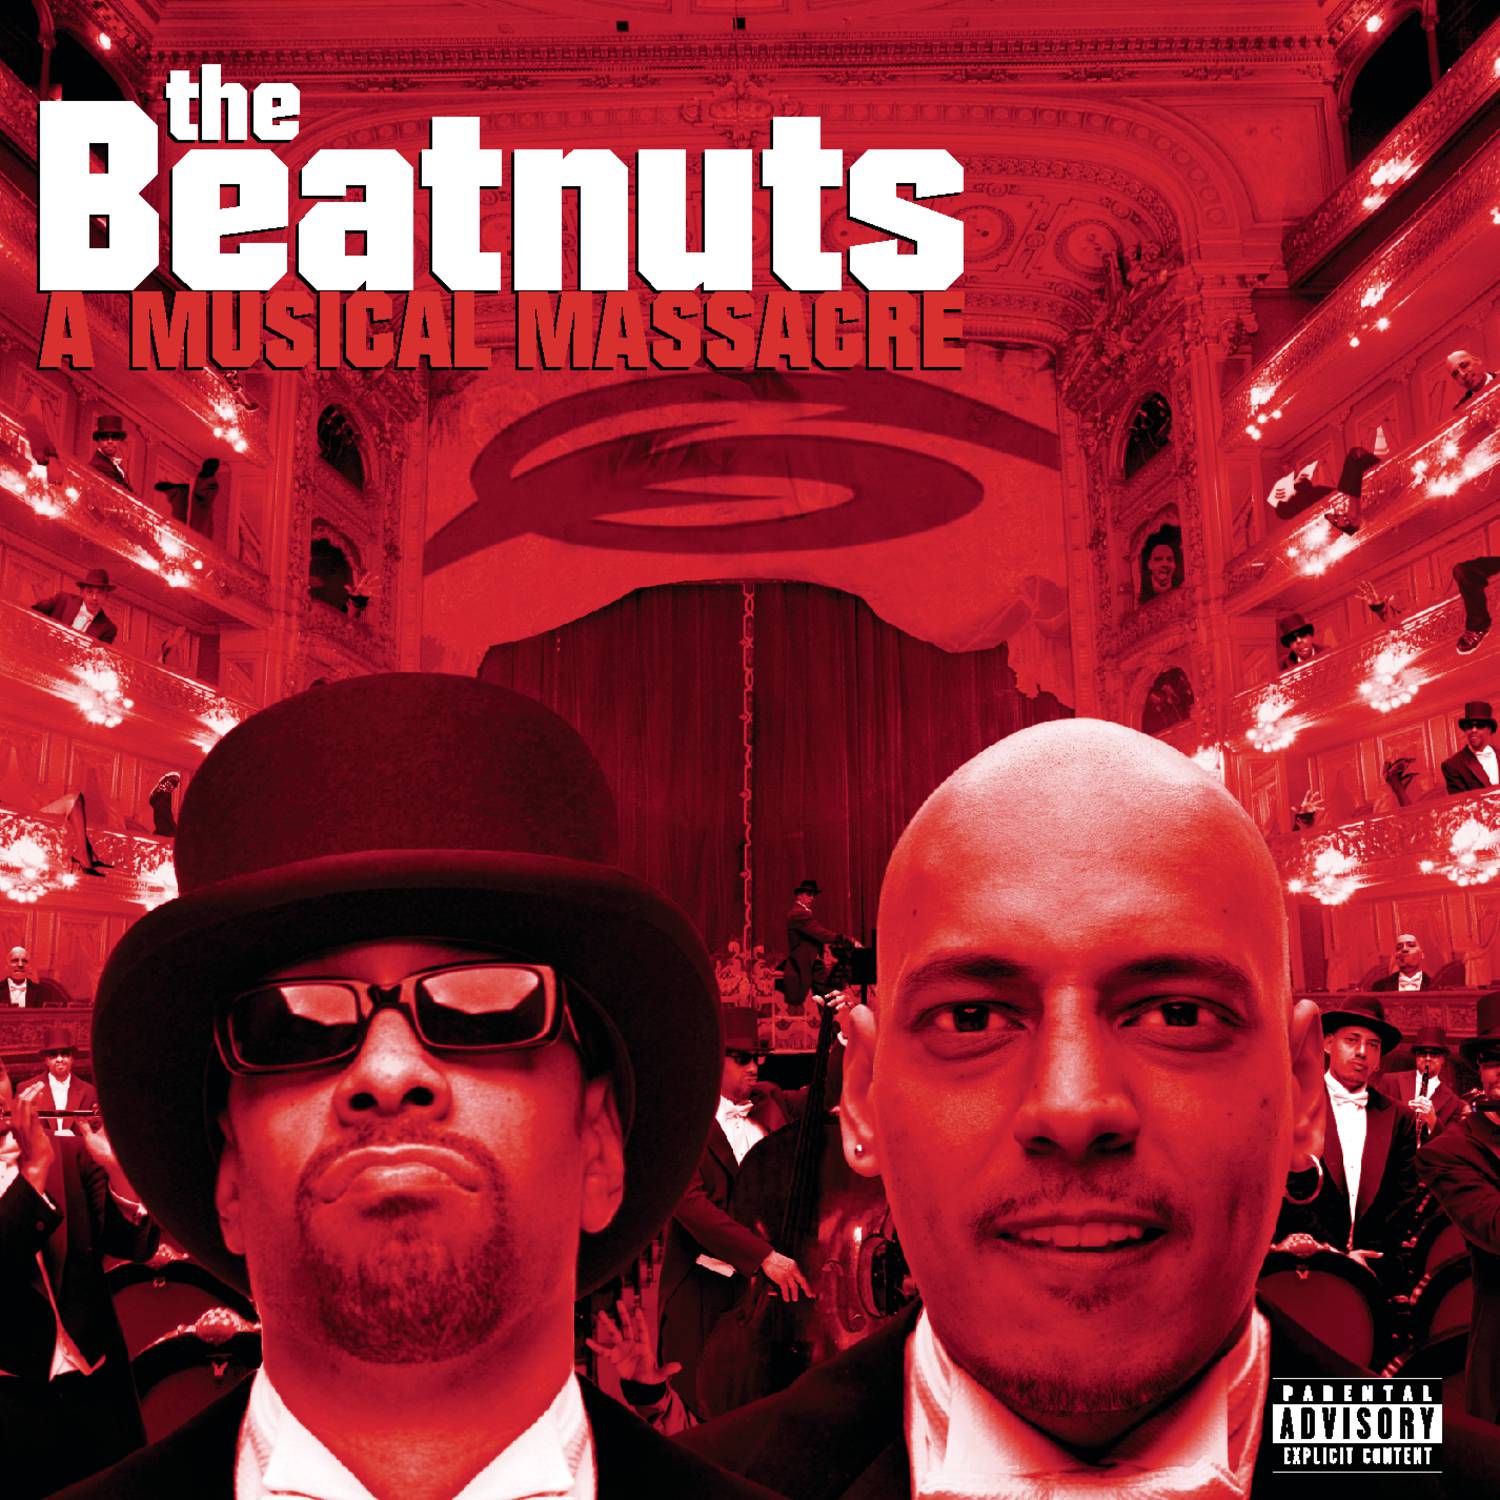 Spelling Beatnuts with Lil' Donny (Explicit Version) - Explicit Version